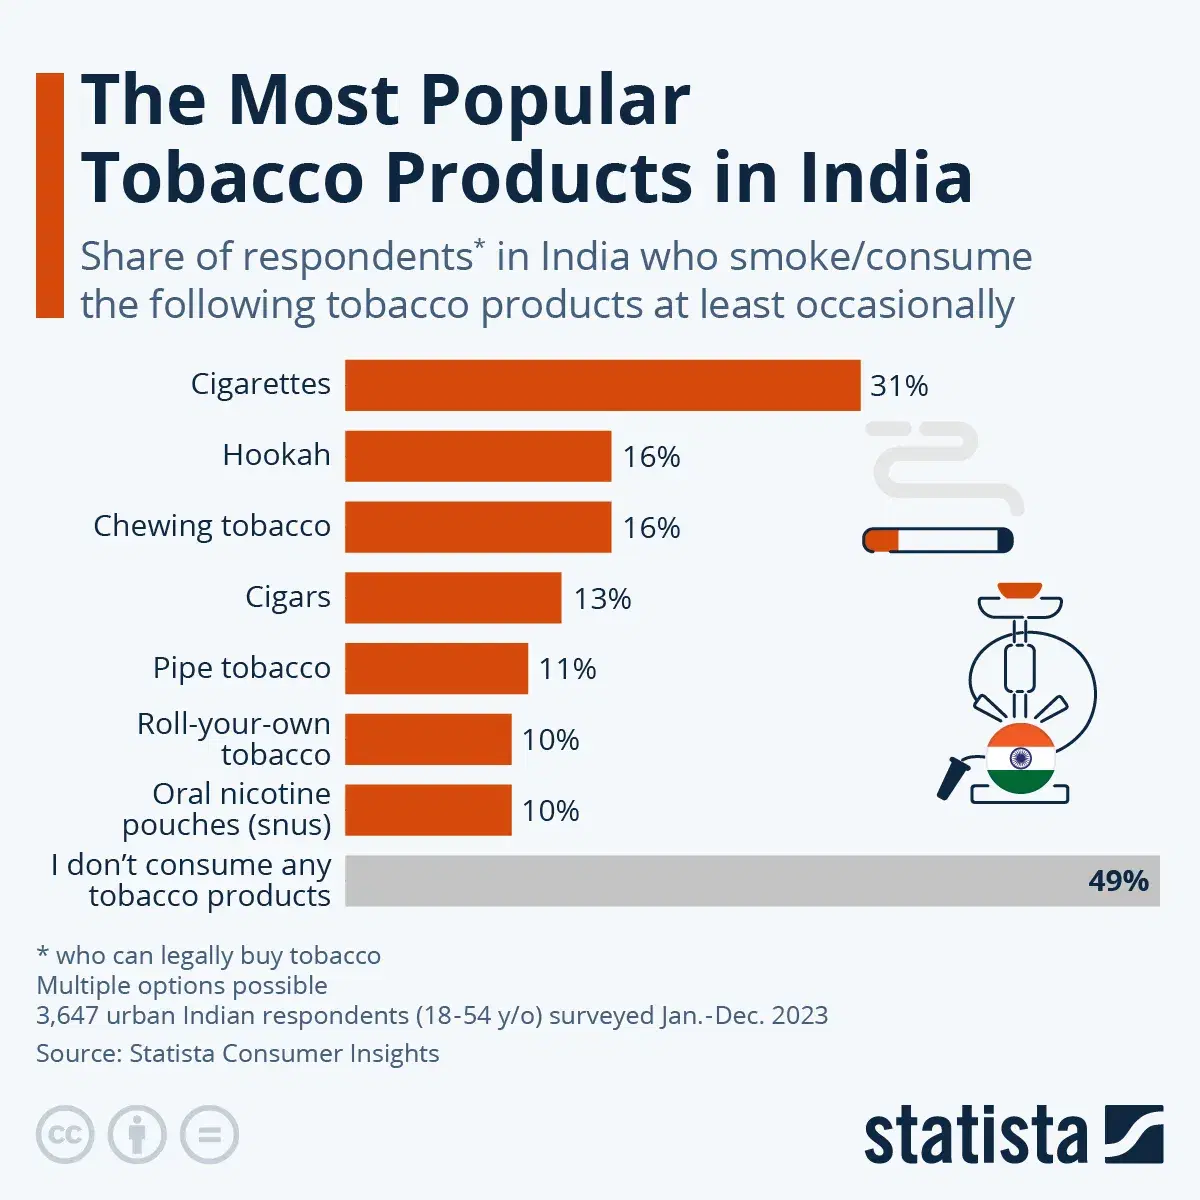 What Are the Most Popular Tobacco Products in India?